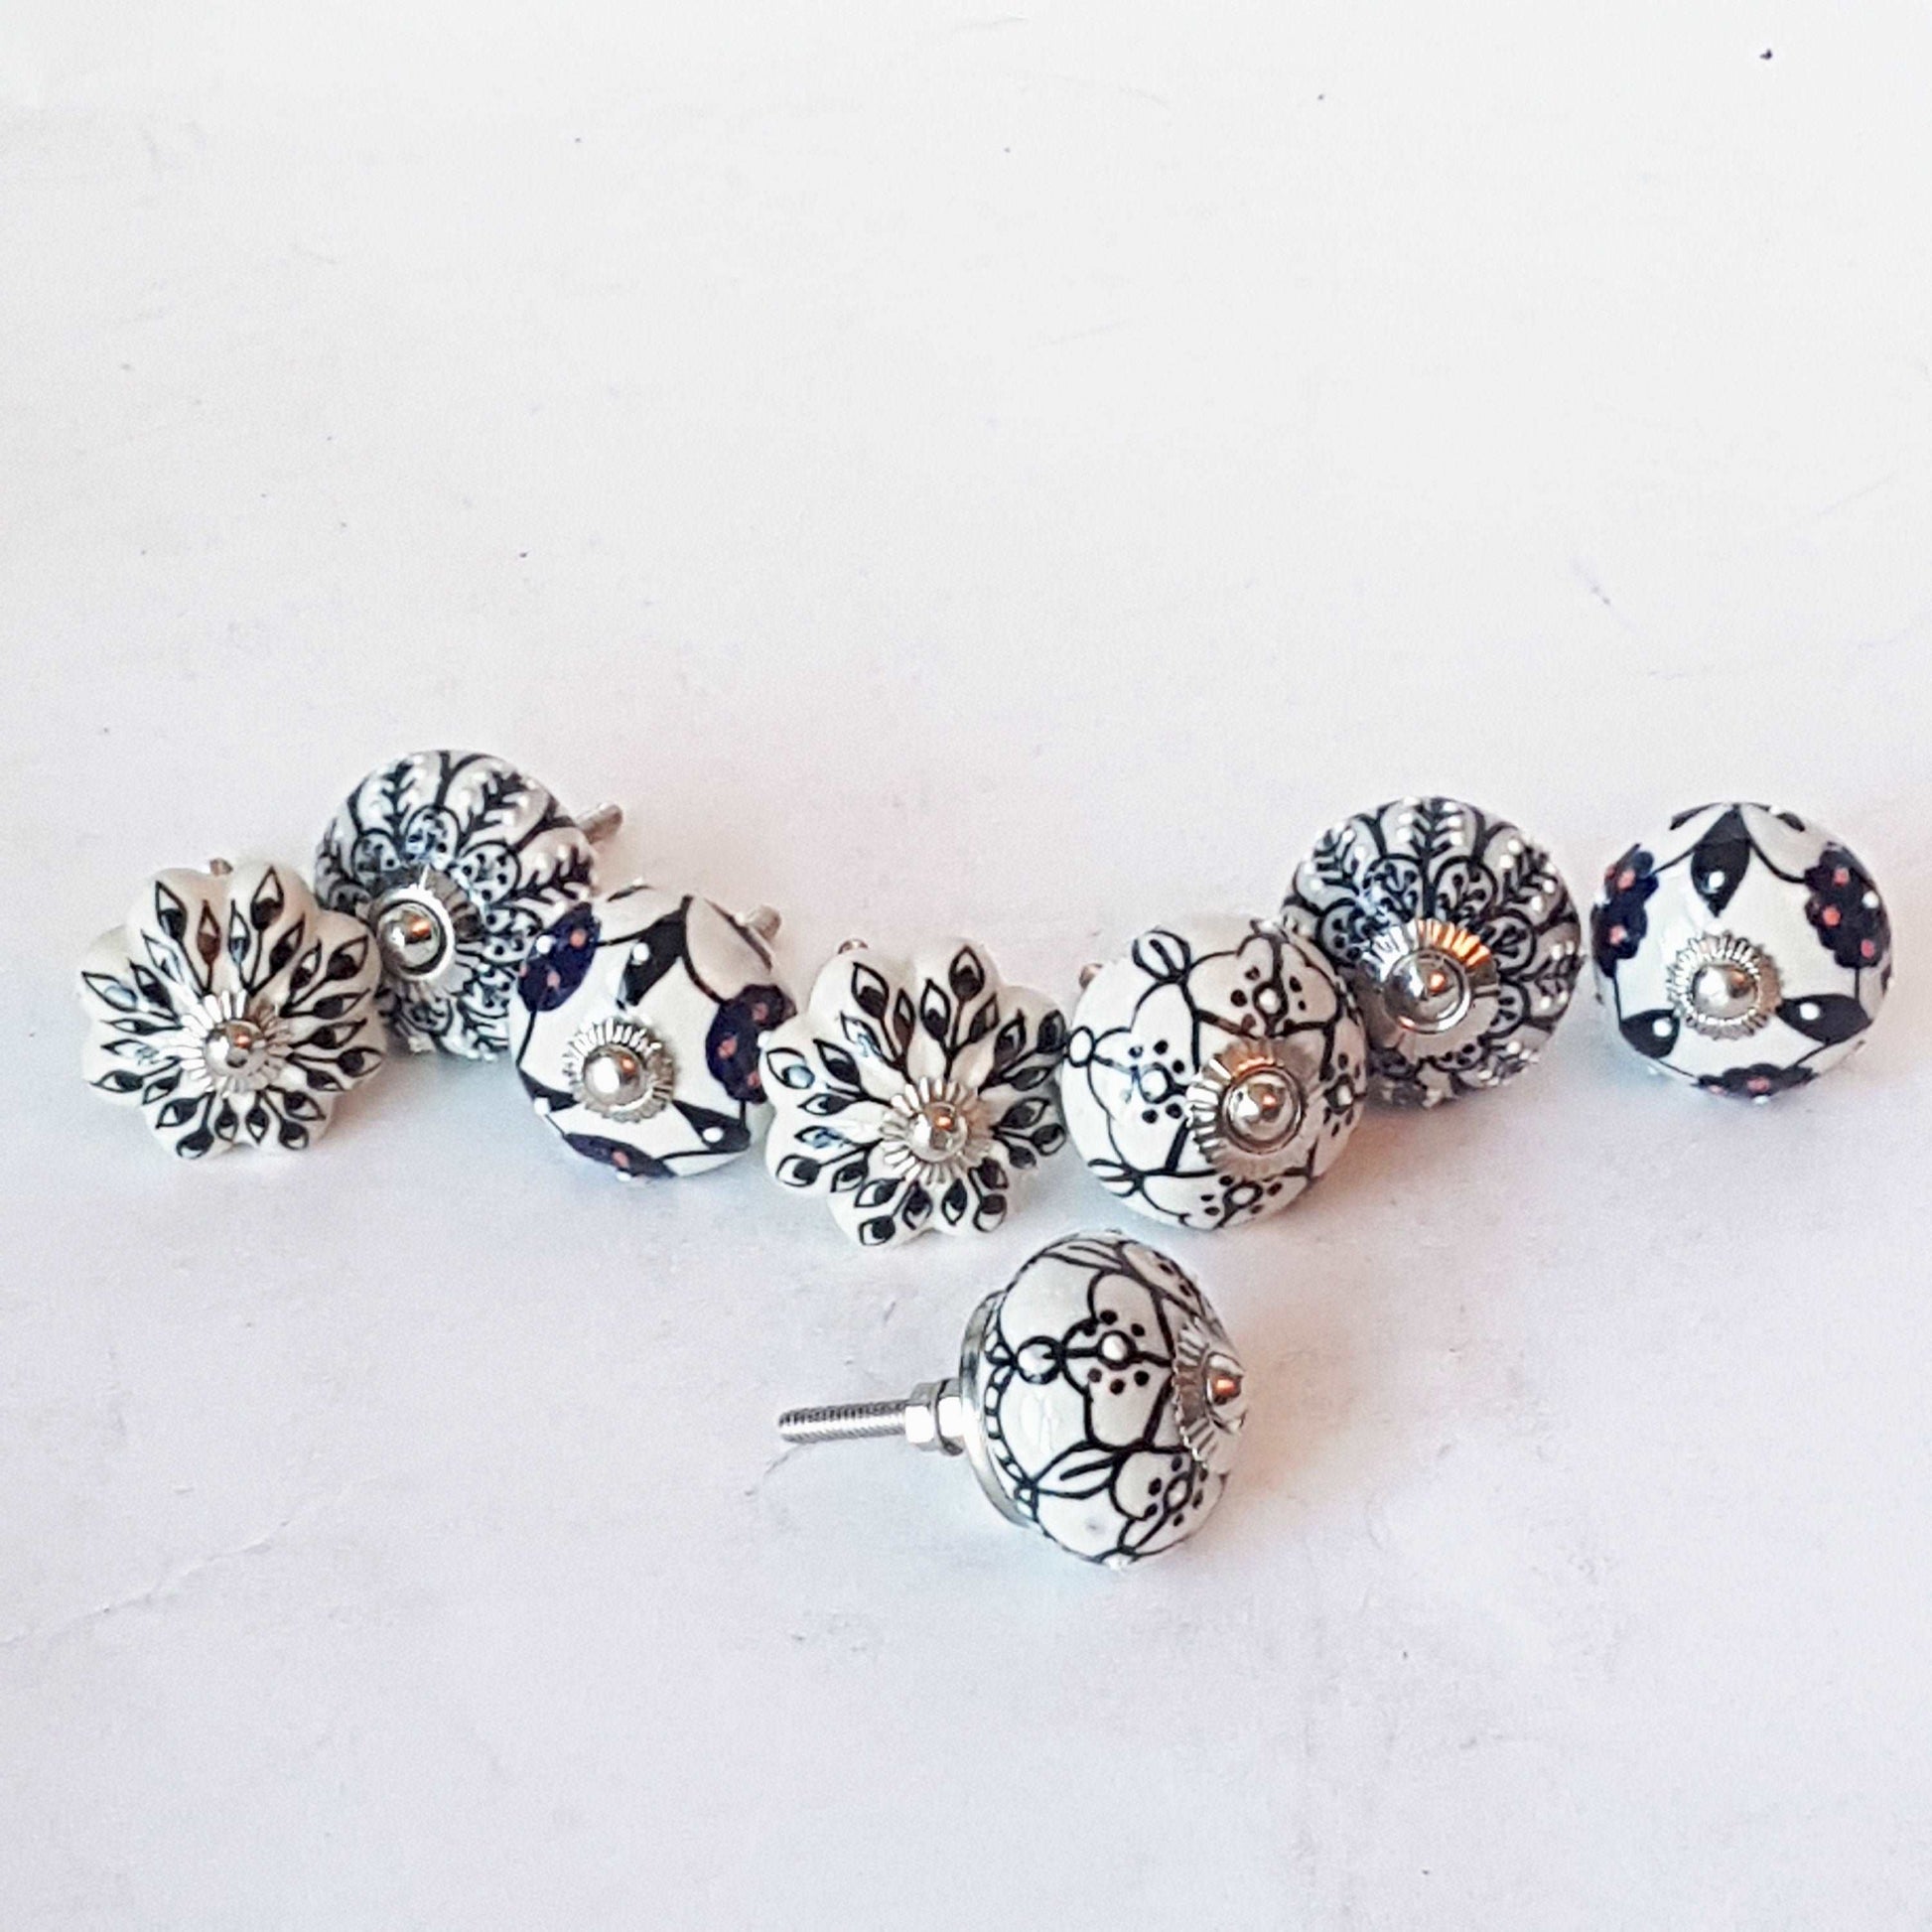 Andromeda set of 8 hand painted cabinet drawer knobs with botanical patterns in black & white.  Exclusive designer collection. In stock now! - Vintage India Ca